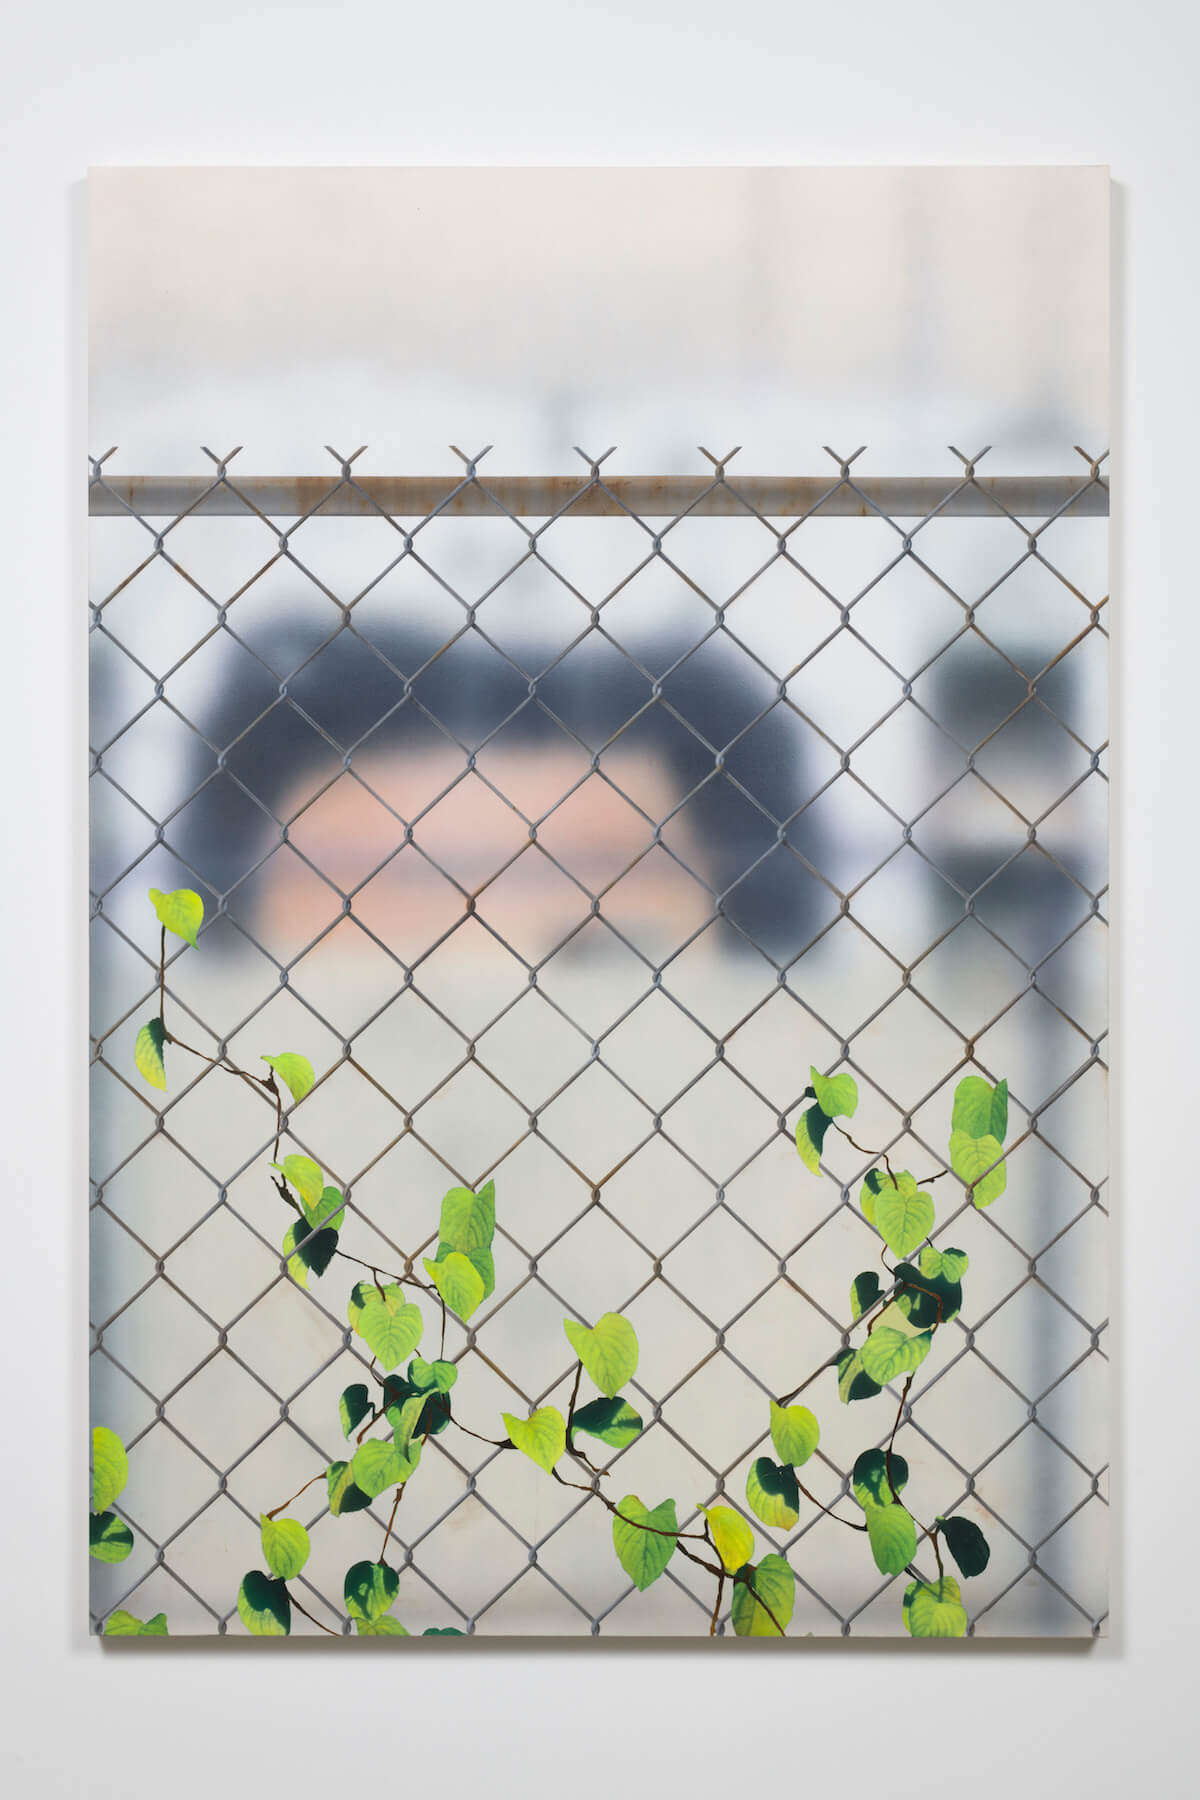 Gomez, Mural with Chain Link and Ivy, 2017 (SG 17.026) A